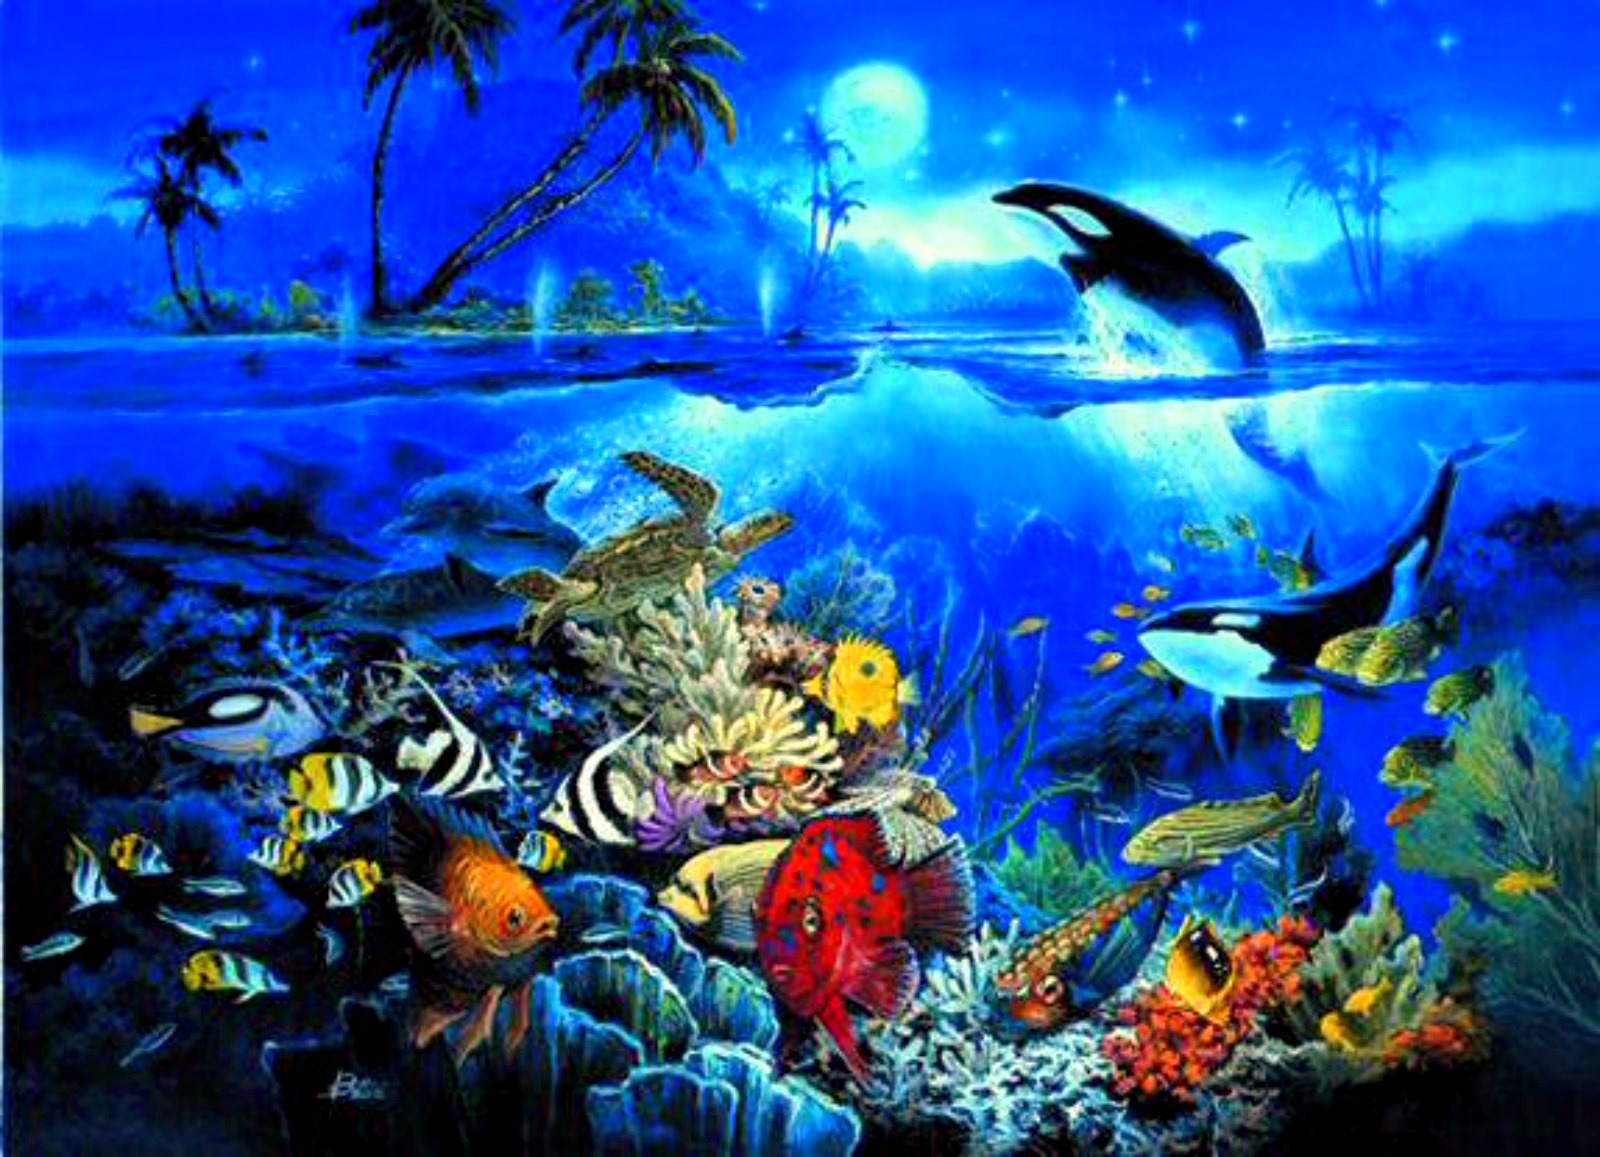 Home Places Travel Underwater Ocean Backgrounds